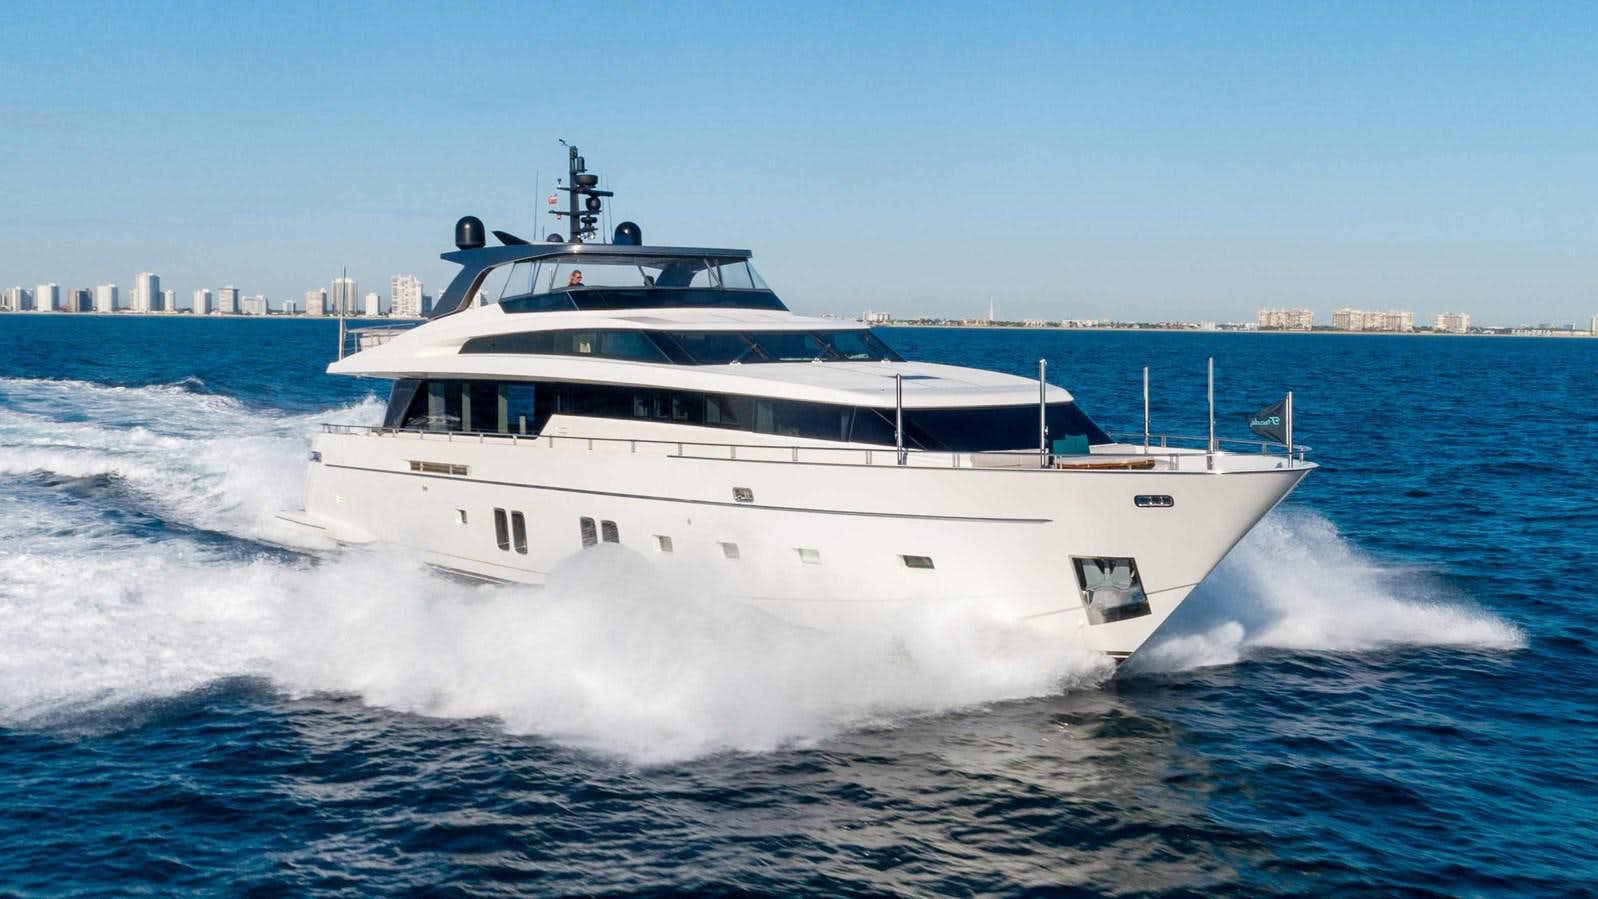 Watch Video for 106 FLYBRIDGE Yacht for Sale